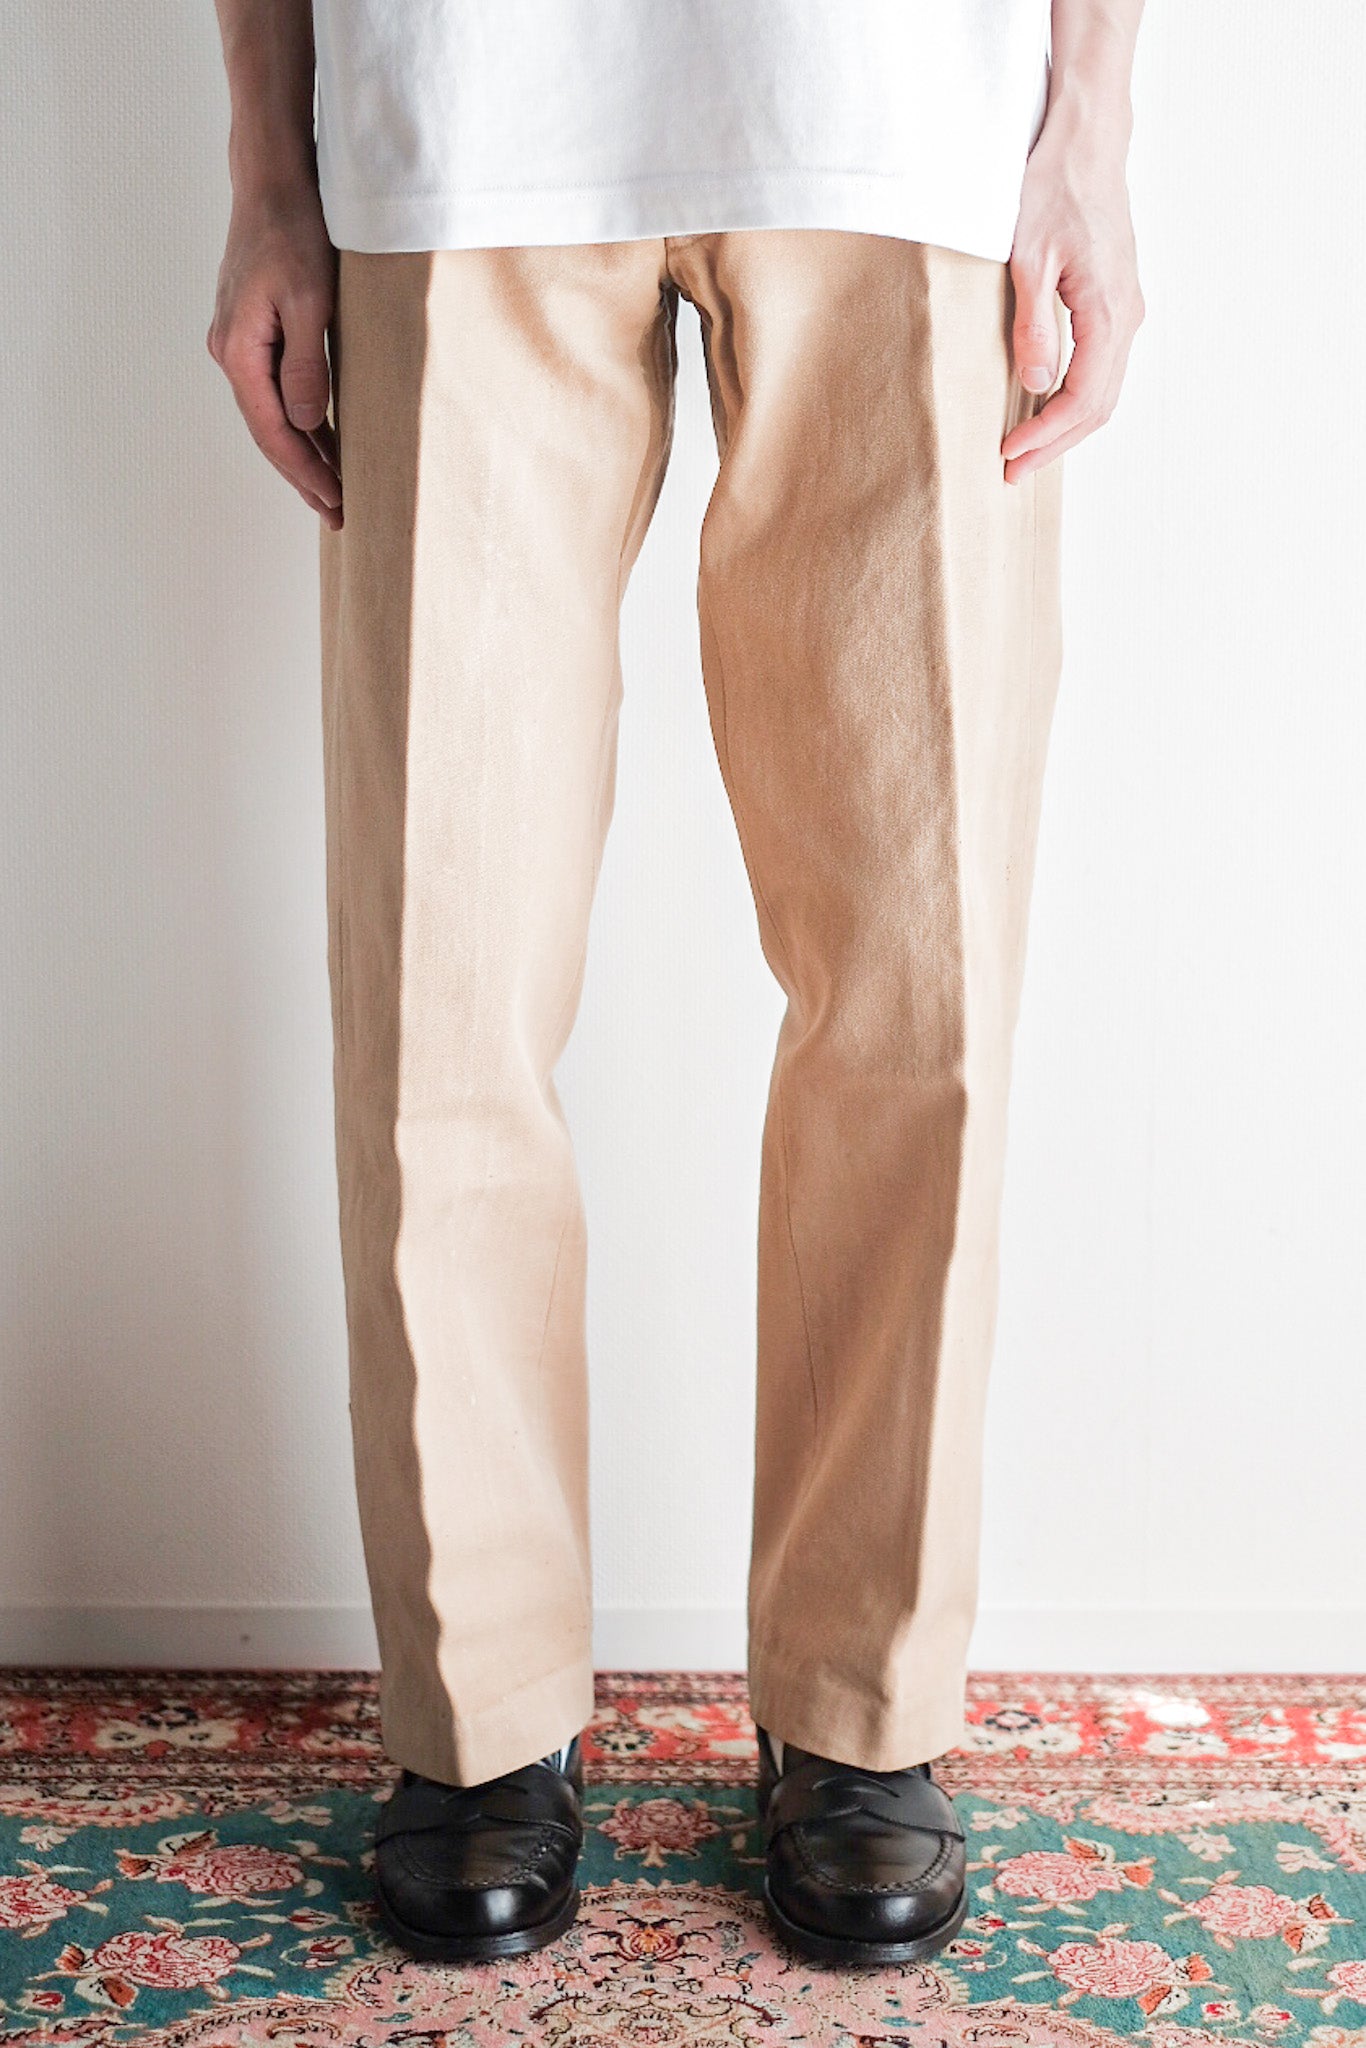 [~ 30's] French Vintage Cotton Canvas Work Pants